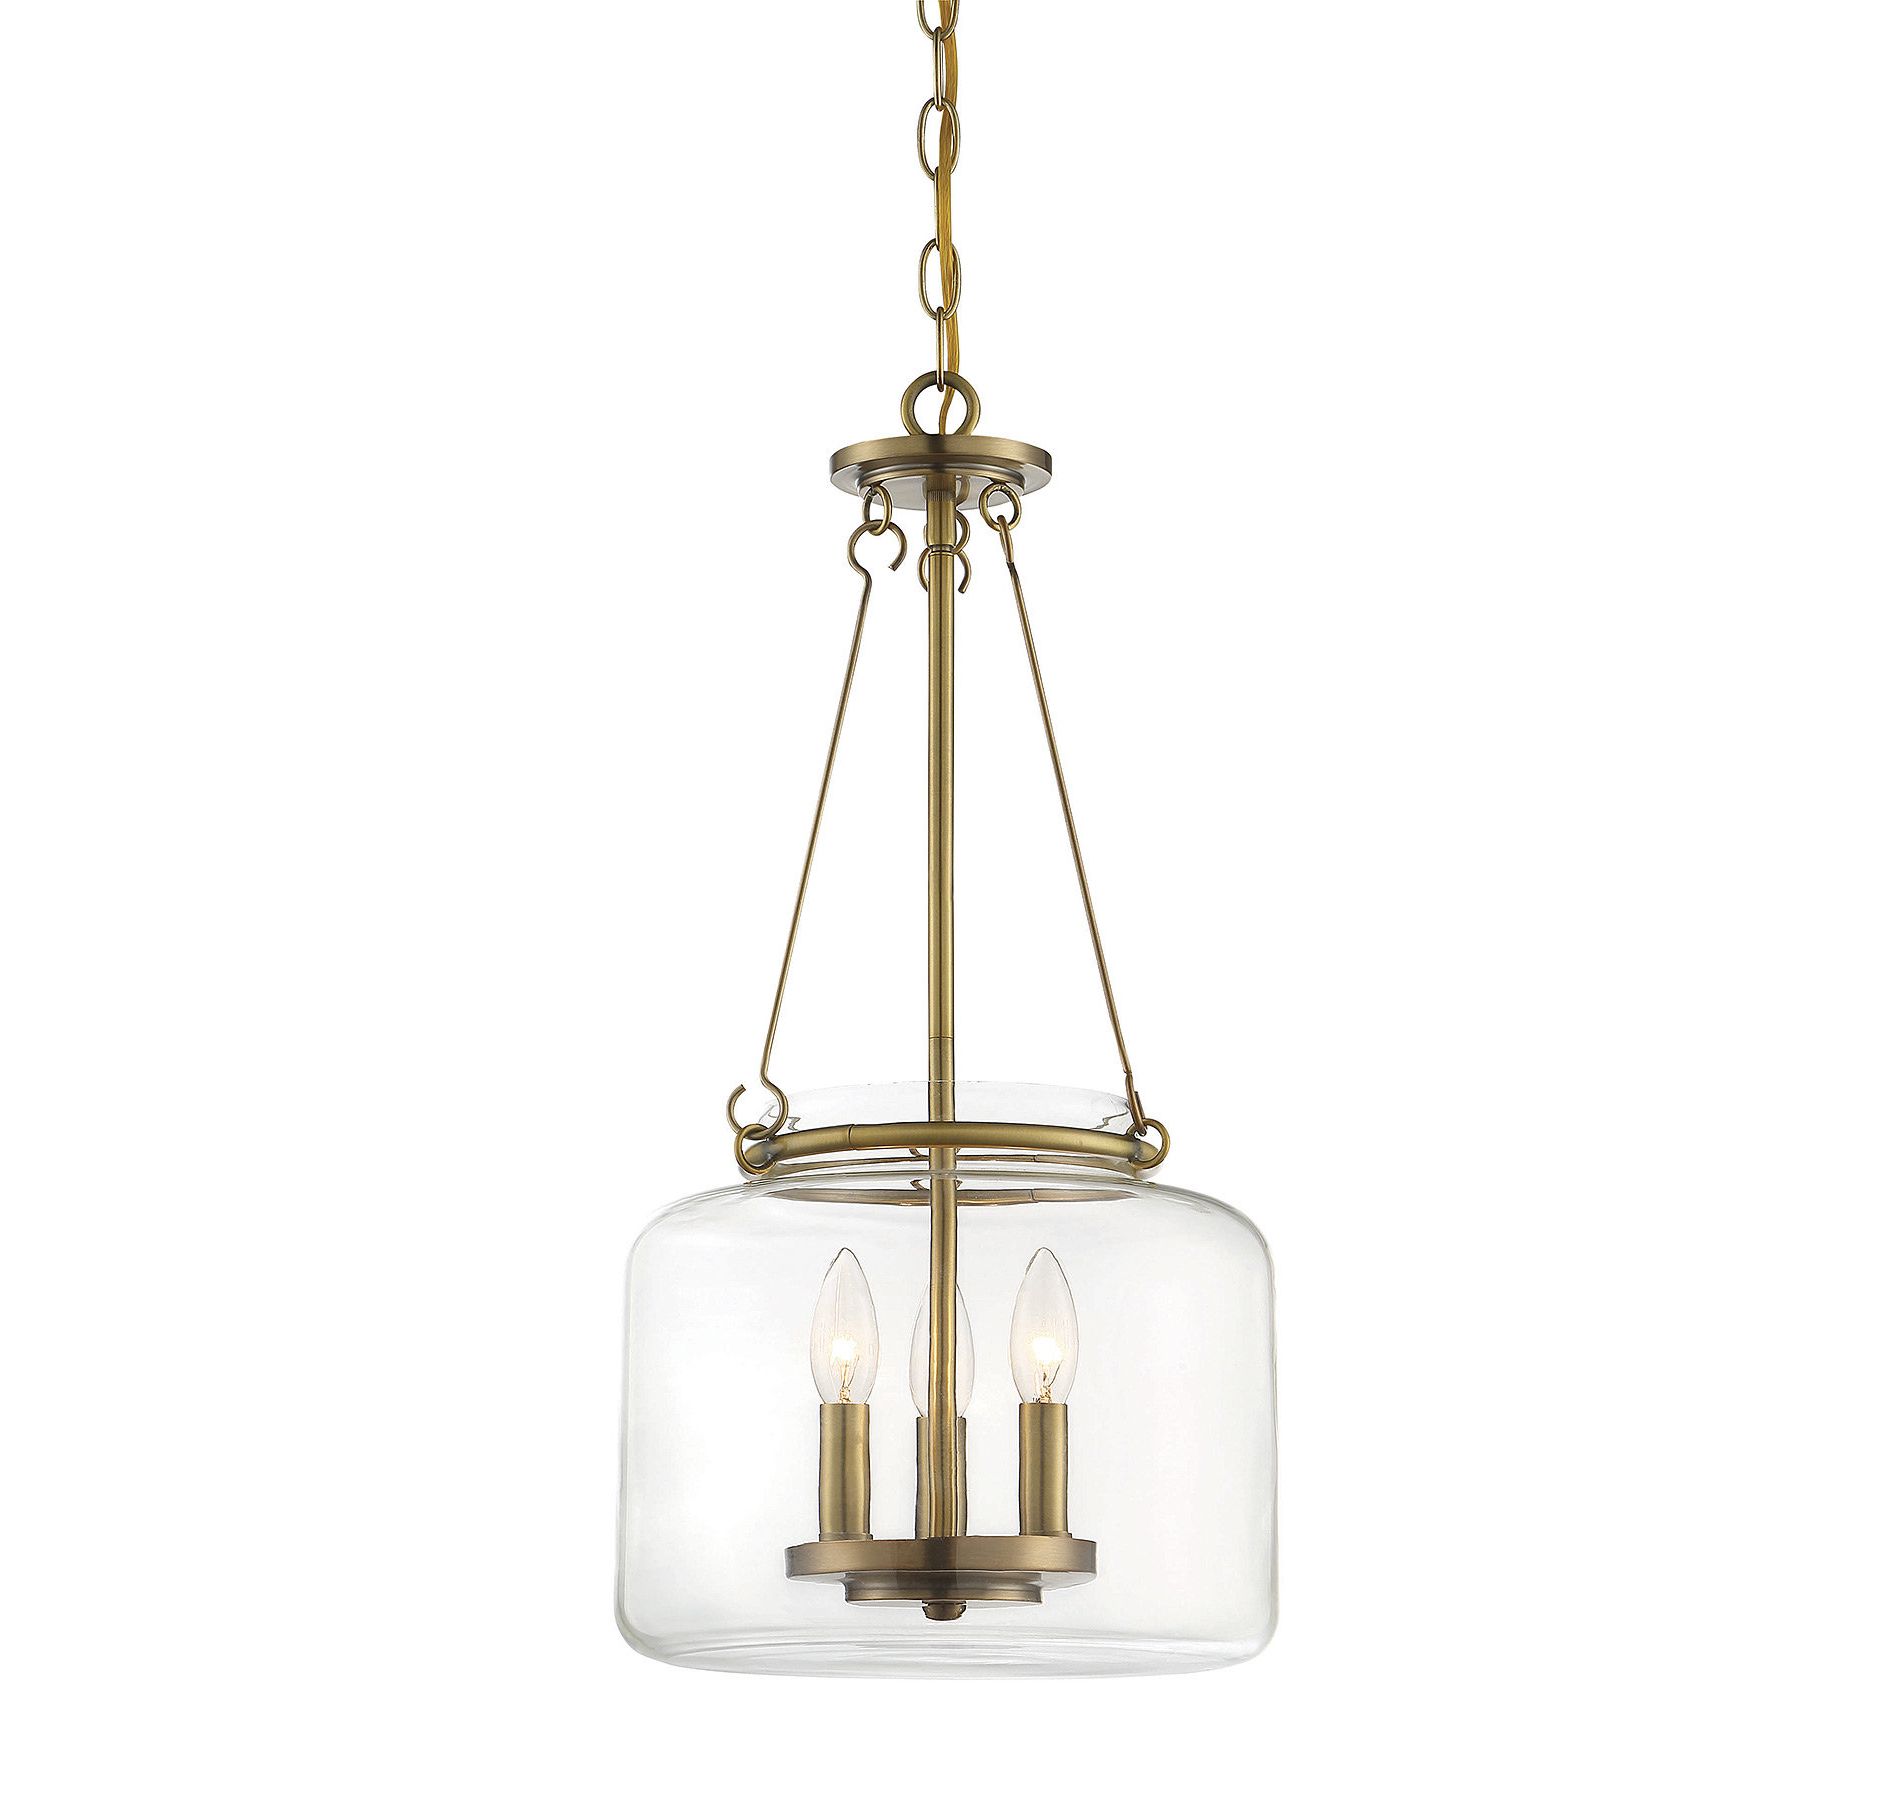 Widely Used Clematite 1 Light Single Jar Pendants With Regard To Laurel Foundry Modern Farmhouse Jean Baptiste 3 Light Single Jar Pendant (Photo 25 of 25)